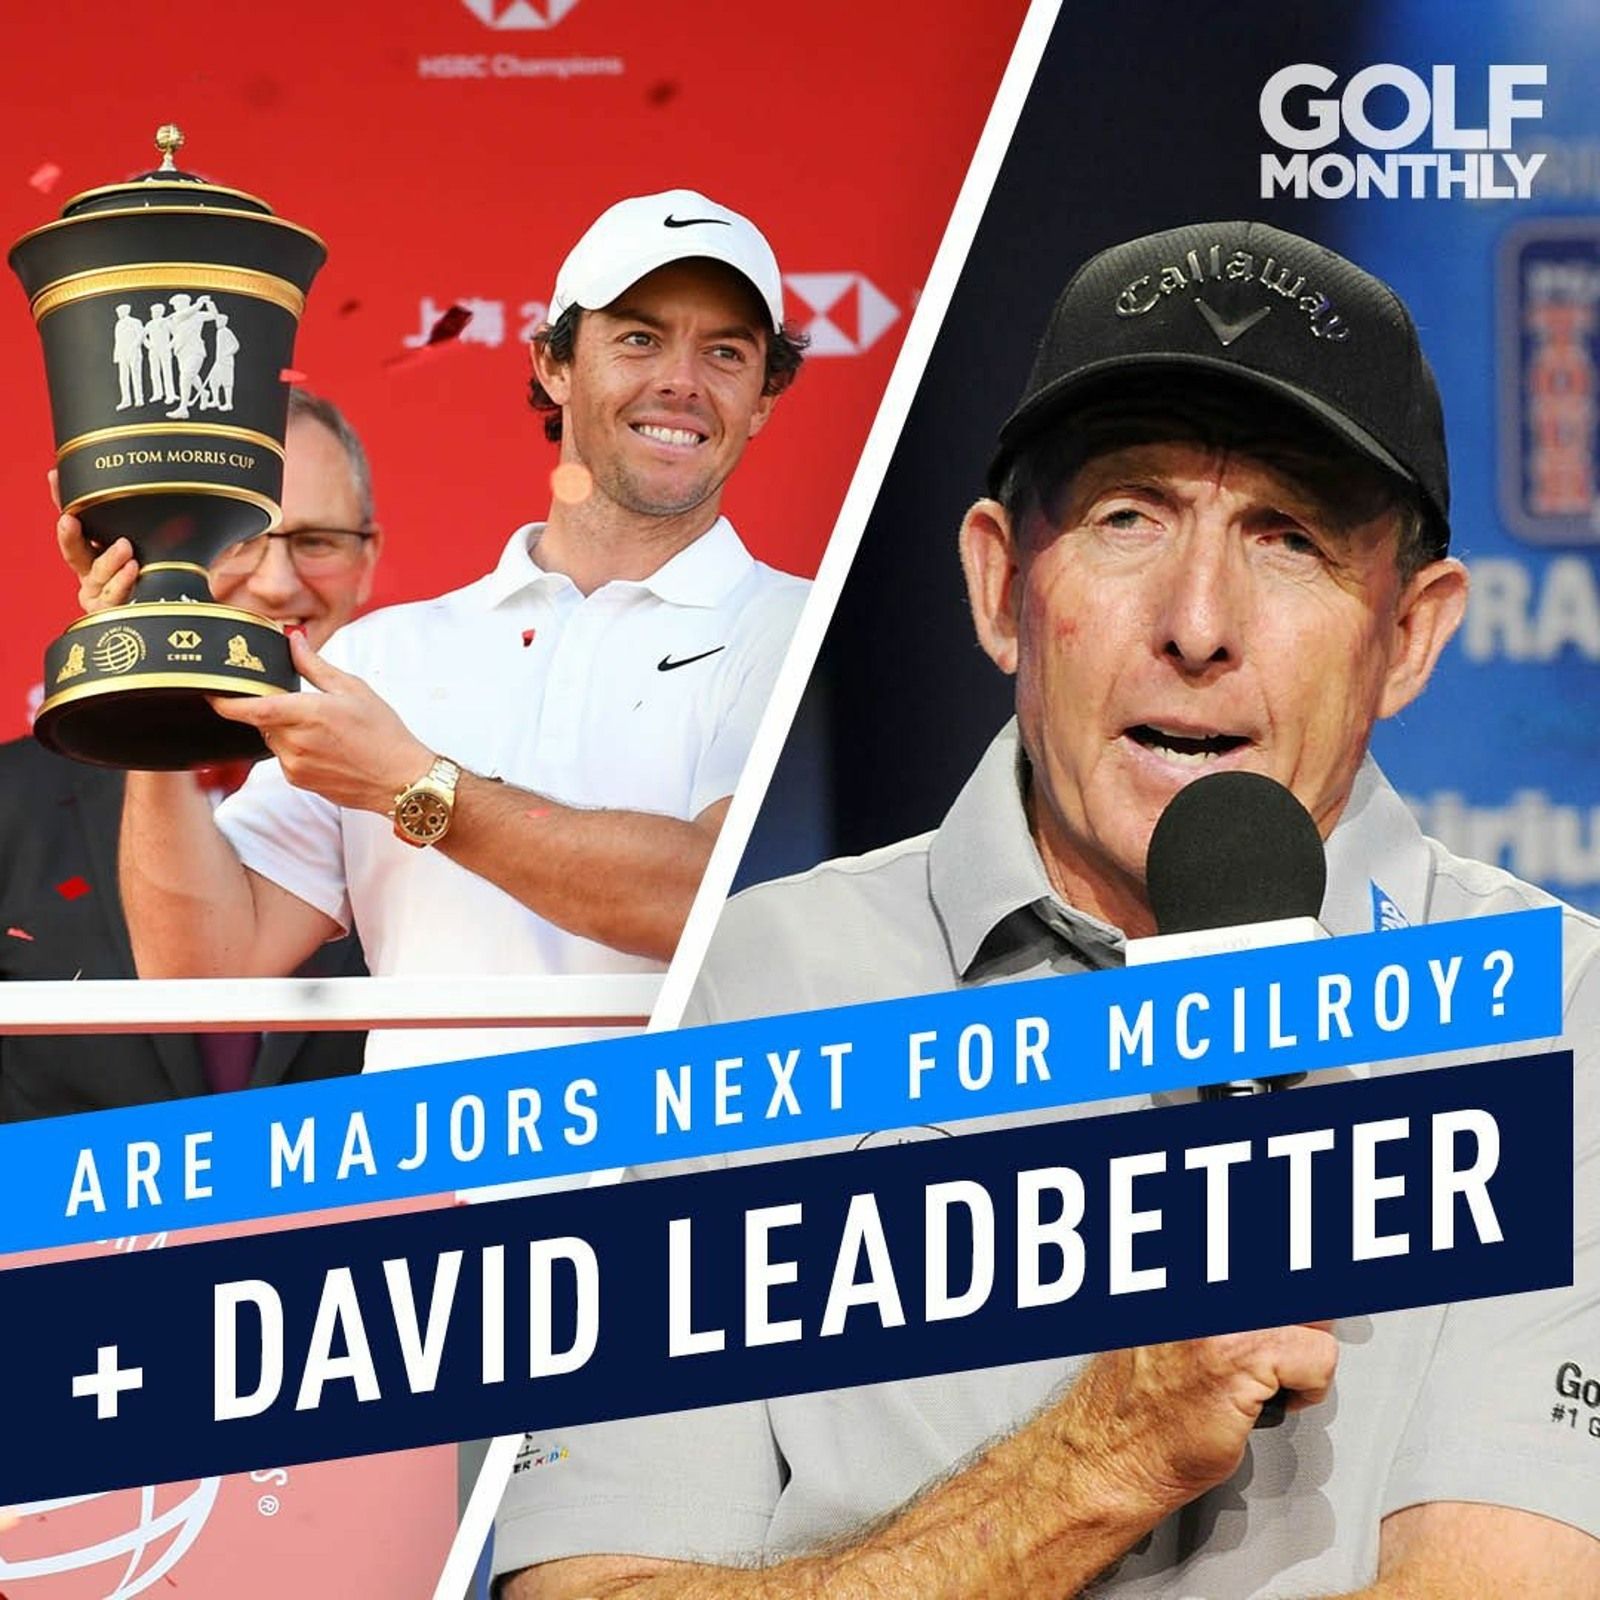 Are Majors Next For McIlroy? + David Leadbetter